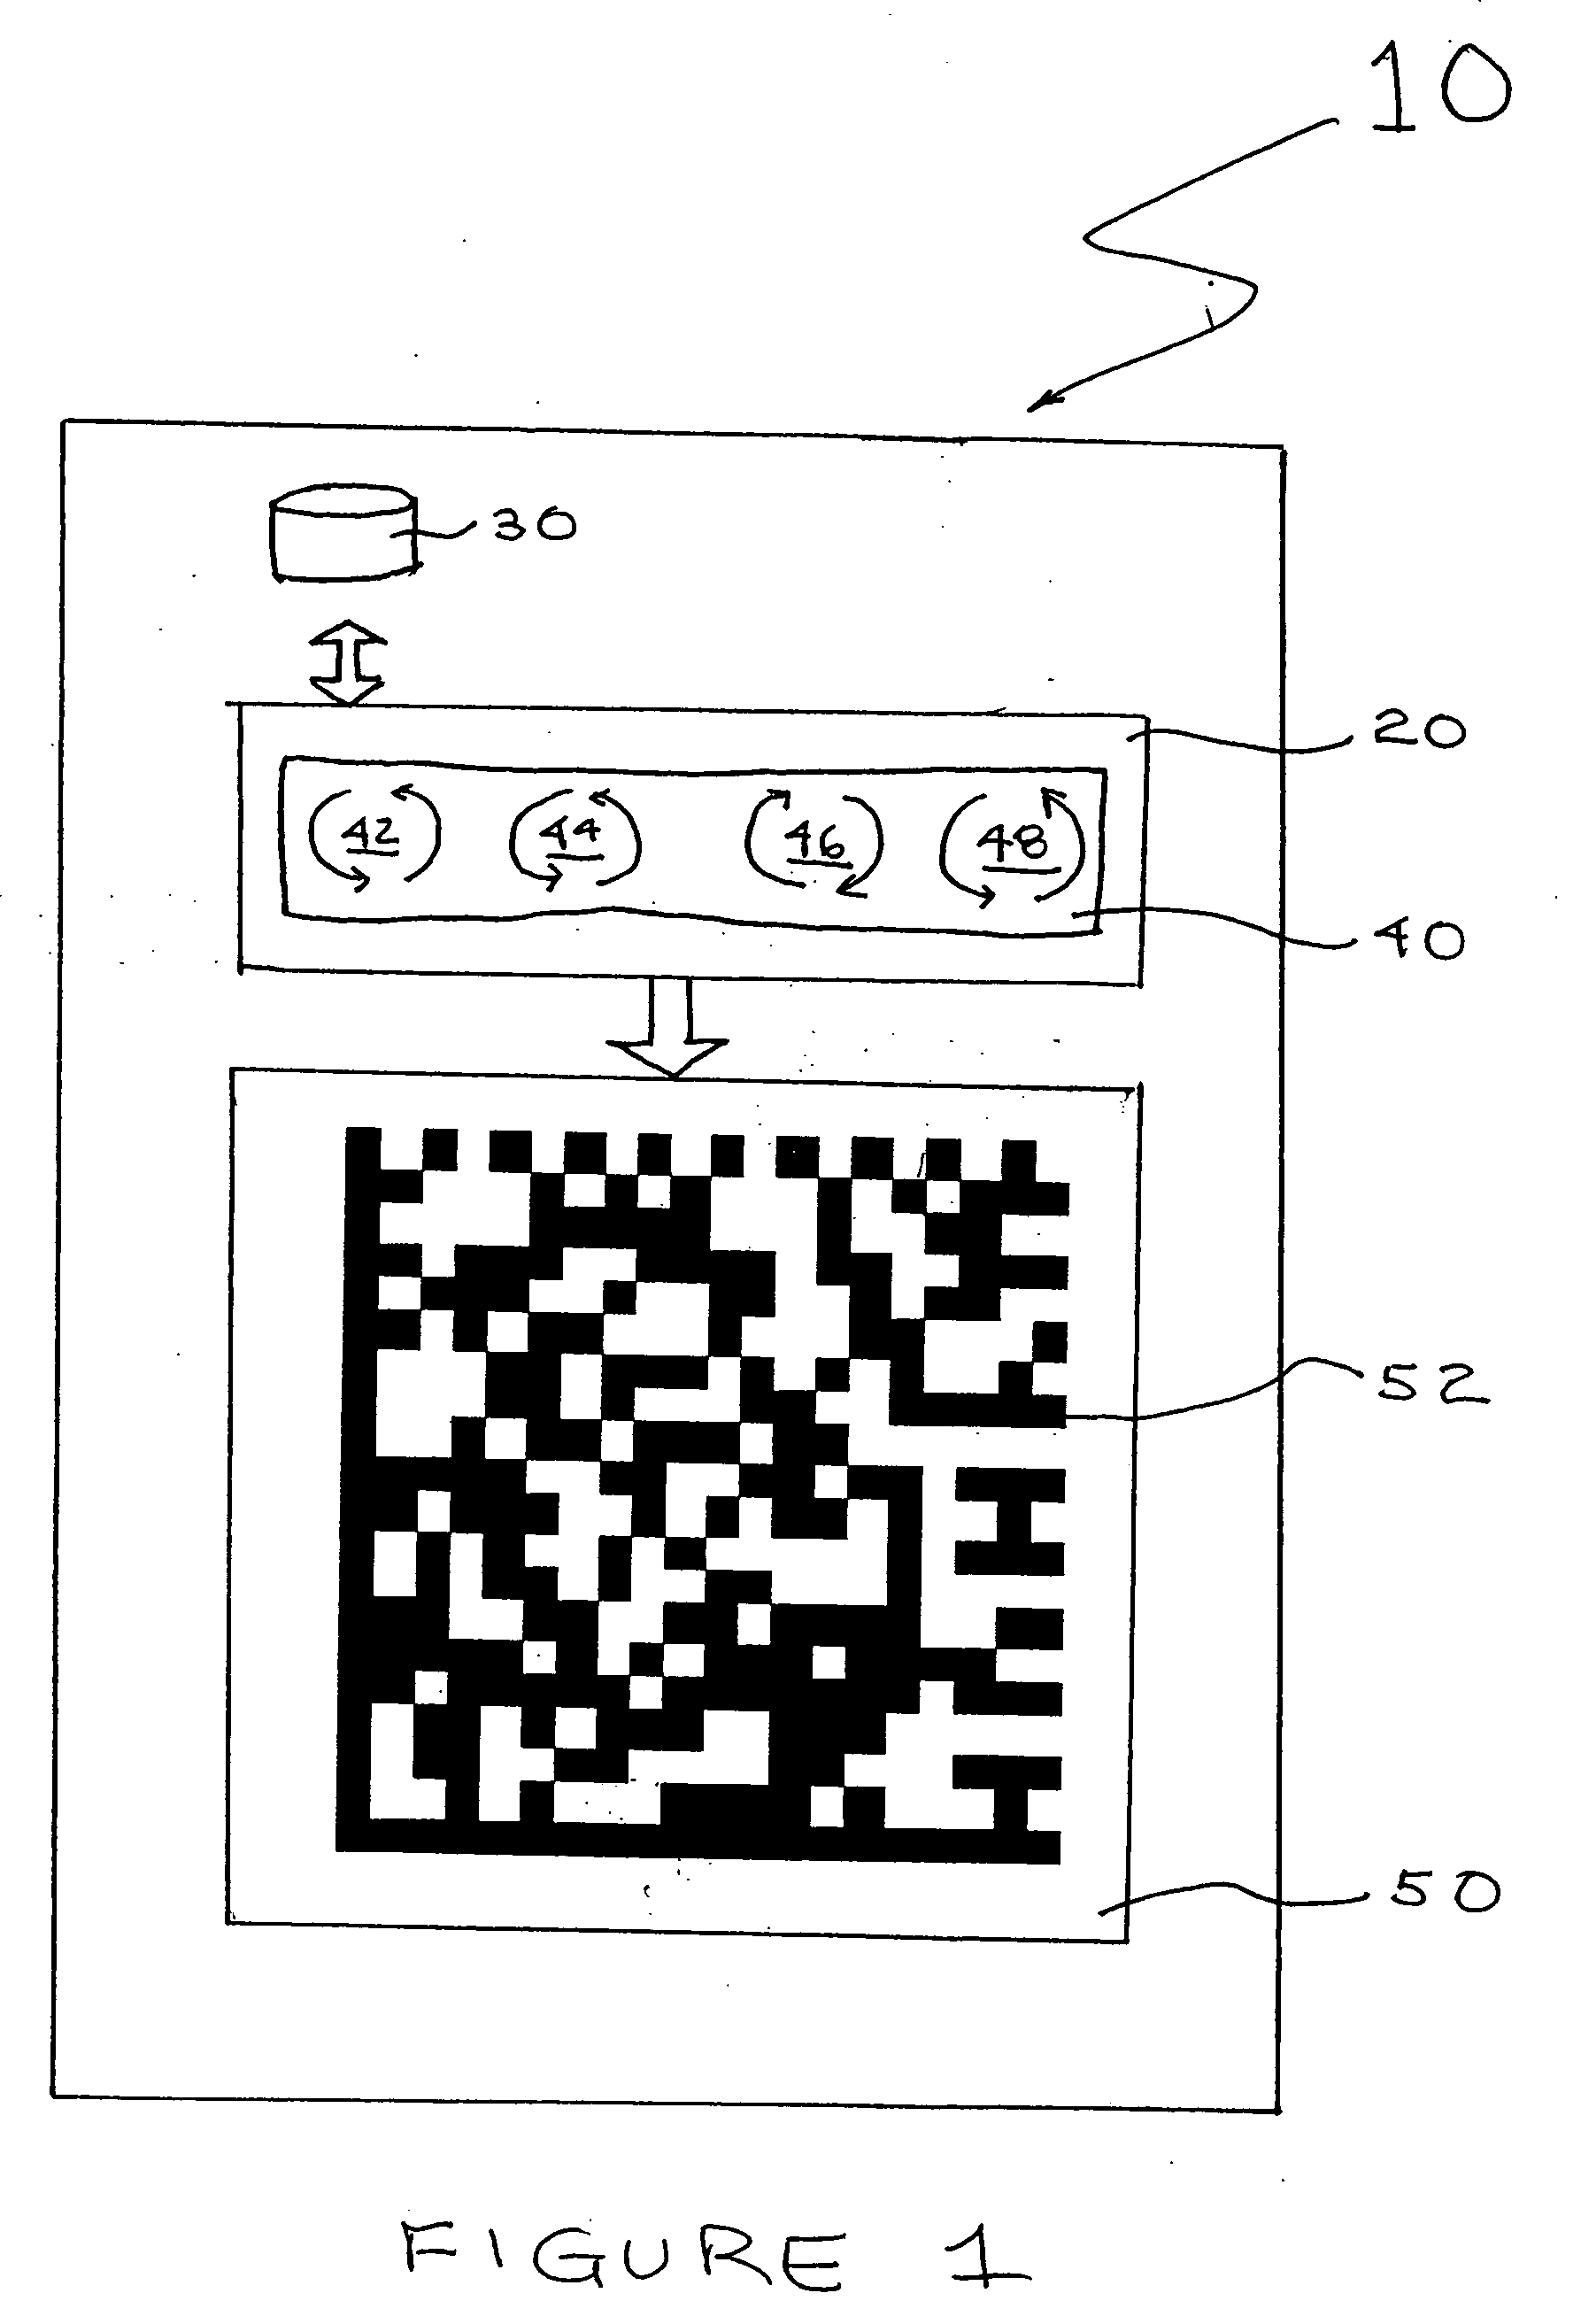 Methods, devices and computer program products for generating, displaying and capturing a series of images of visually encoded data